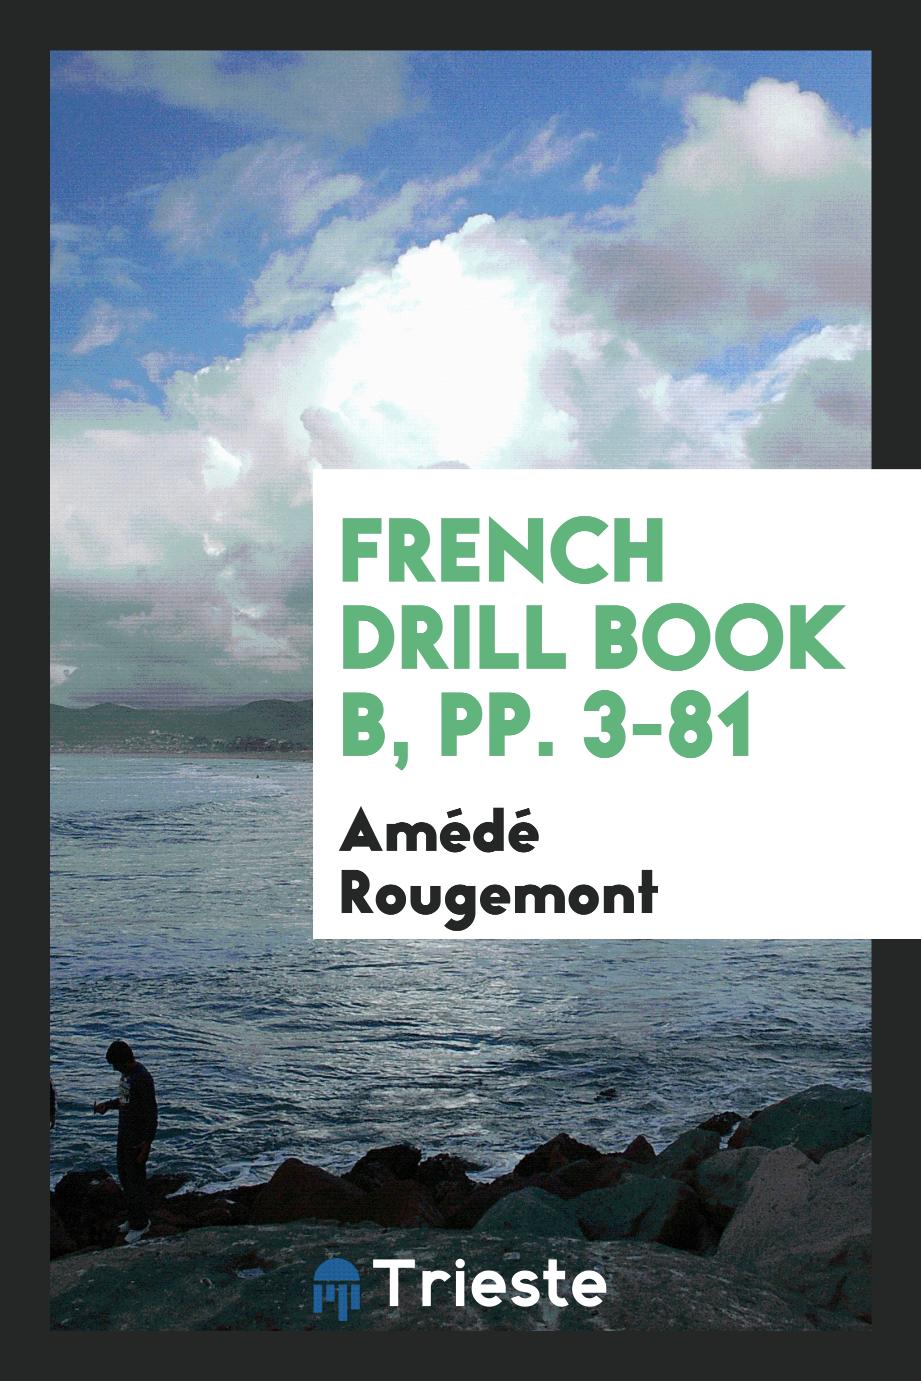 French Drill Book B, pp. 3-81